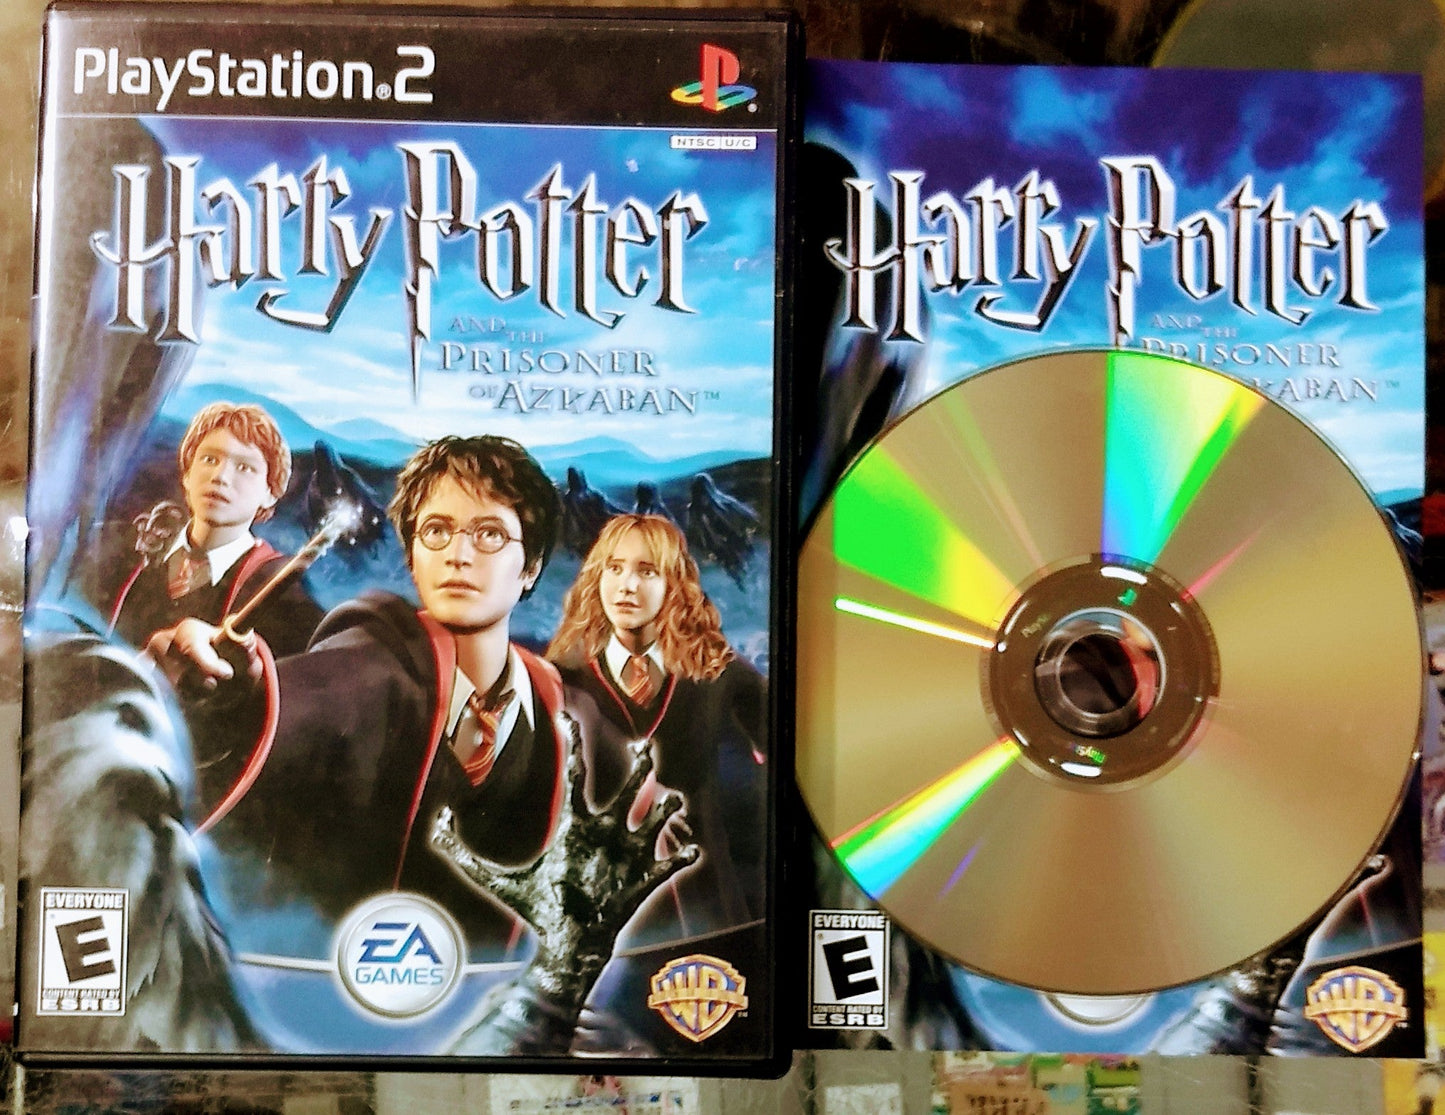 HARRY POTTER AND THE PRISONER OF AZKABAN (PLAYSTATION 2 PS2) - jeux video game-x